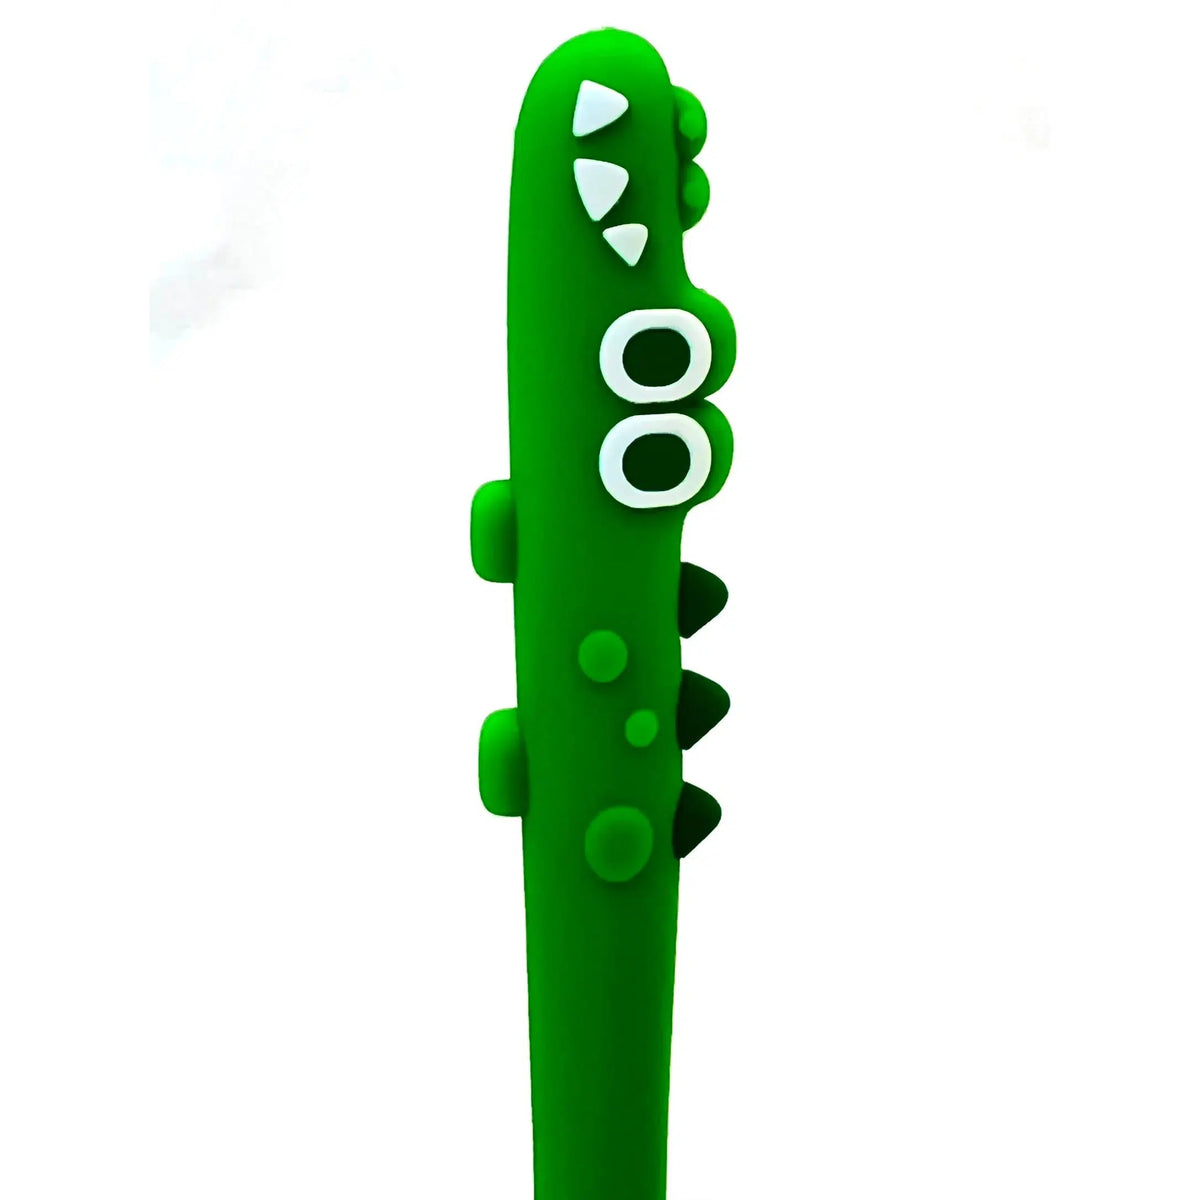 Front view of Crocodile Gel Pen showing mostly the head and back.